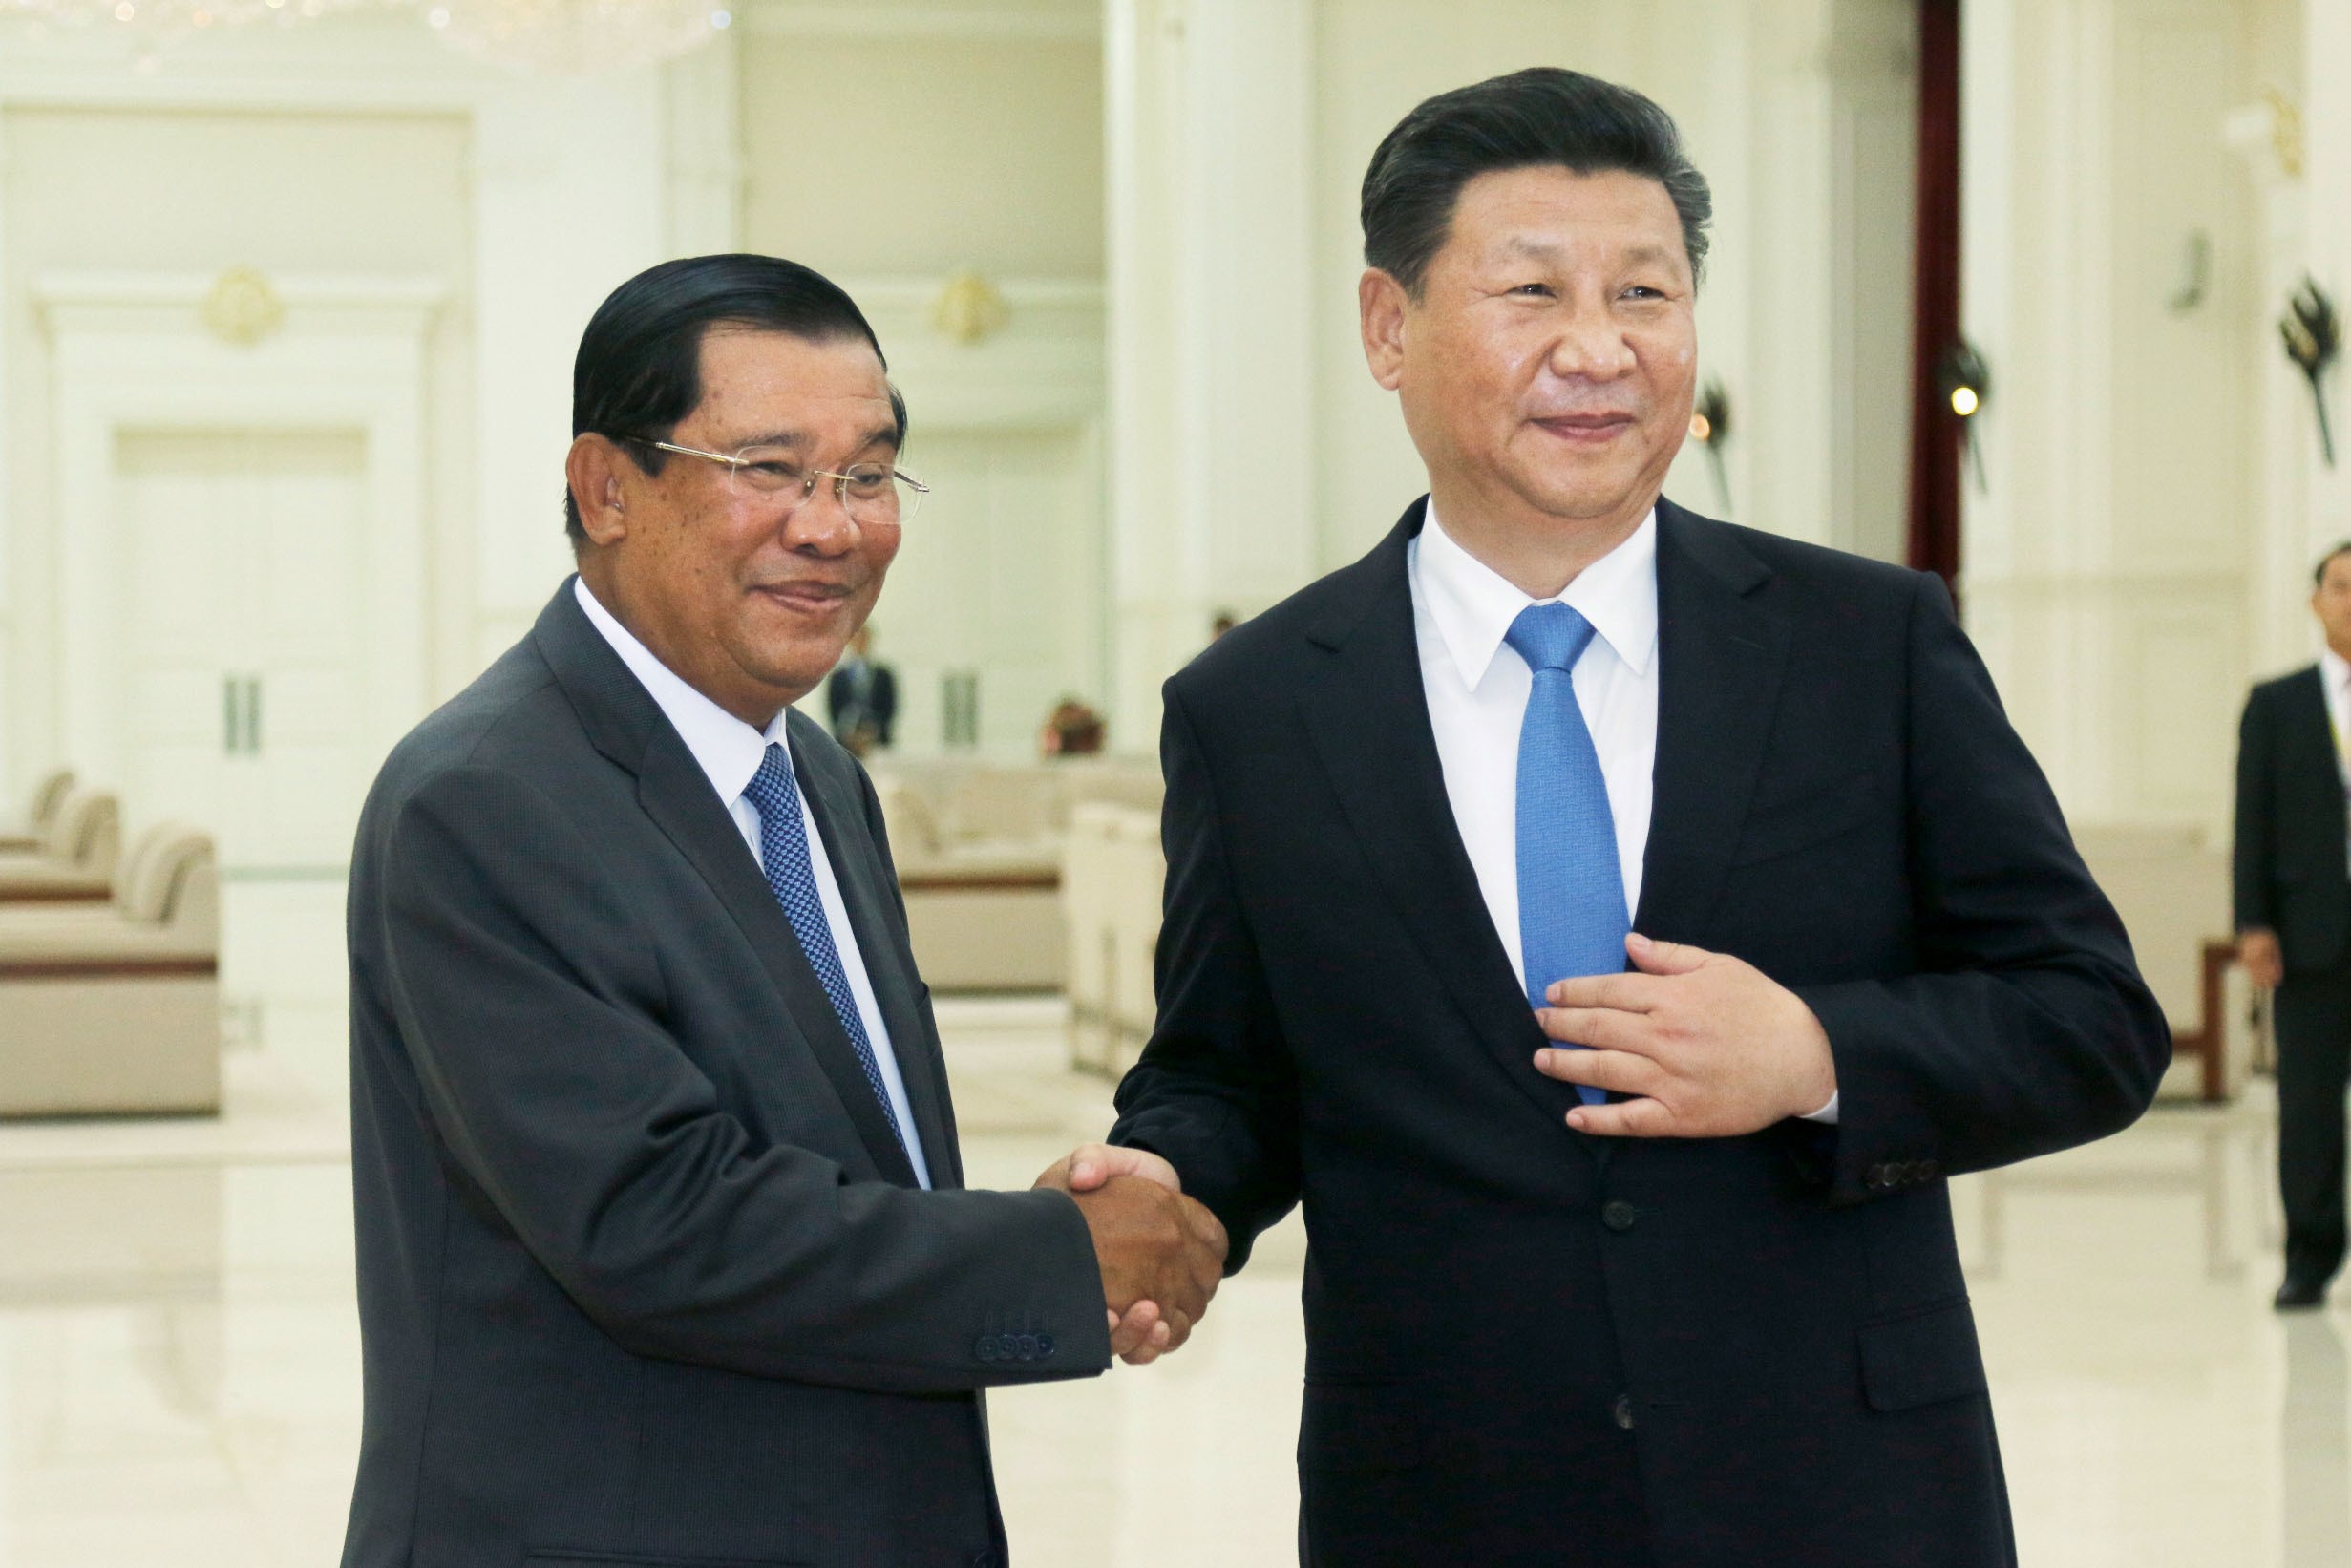 Cambodian Prime Minister Hun Sen shakes hands with Chinese President Xi Jinping in October 2016. Photo: Kyodo